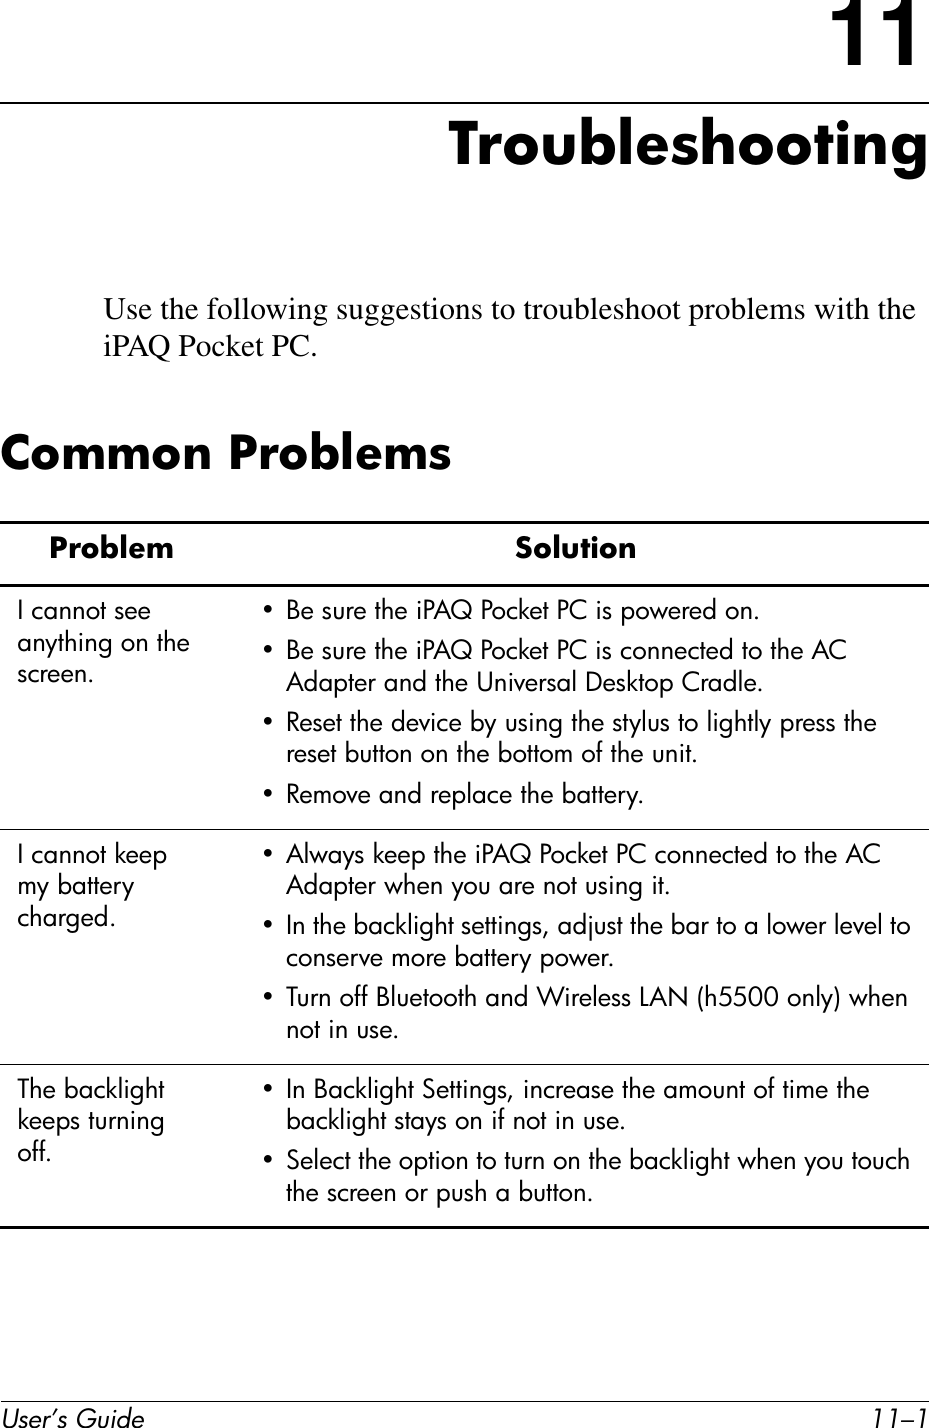 User’s Guide 11–111TroubleshootingUse the following suggestions to troubleshoot problems with the iPAQ Pocket PC.Common ProblemsProblem SolutionI cannot see anything on the screen.• Be sure the iPAQ Pocket PC is powered on.• Be sure the iPAQ Pocket PC is connected to the AC Adapter and the Universal Desktop Cradle.• Reset the device by using the stylus to lightly press the reset button on the bottom of the unit.• Remove and replace the battery.I cannot keep my battery charged.• Always keep the iPAQ Pocket PC connected to the AC Adapter when you are not using it.• In the backlight settings, adjust the bar to a lower level to conserve more battery power.• Turn off Bluetooth and Wireless LAN (h5500 only) when not in use.The backlight keeps turning off.• In Backlight Settings, increase the amount of time the backlight stays on if not in use.• Select the option to turn on the backlight when you touch the screen or push a button.